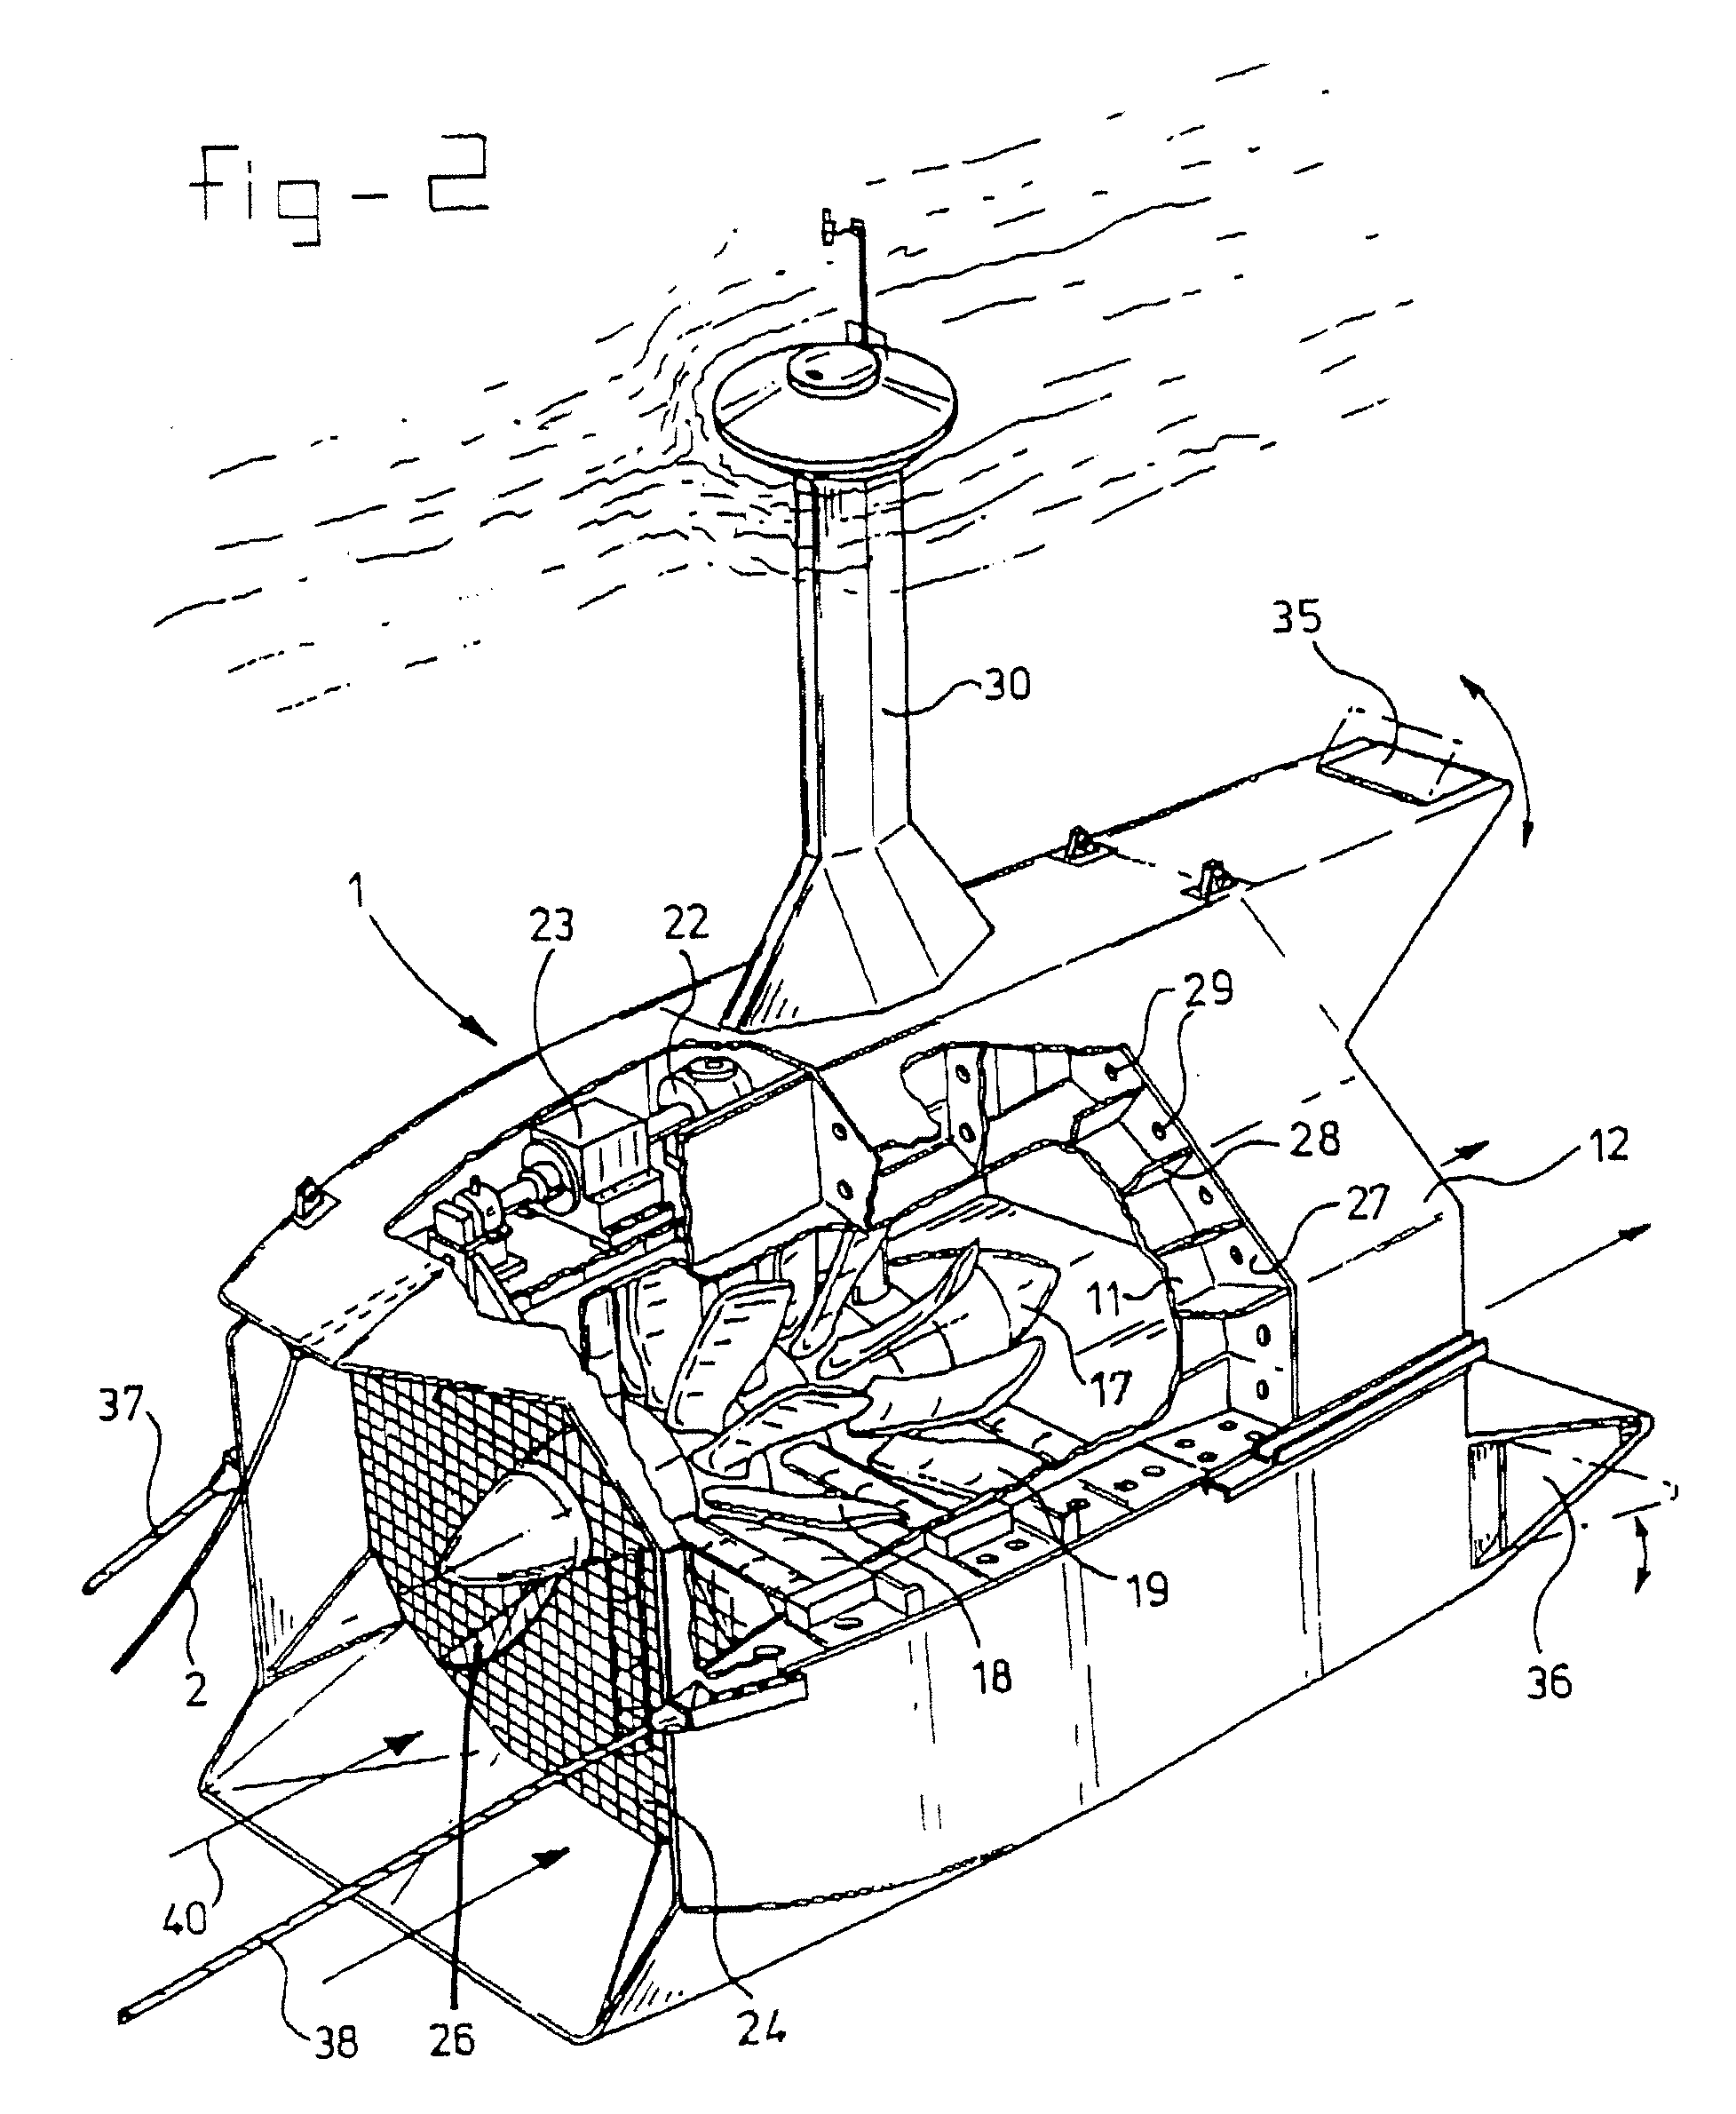 System for producing hydrogen making use of a stream of water